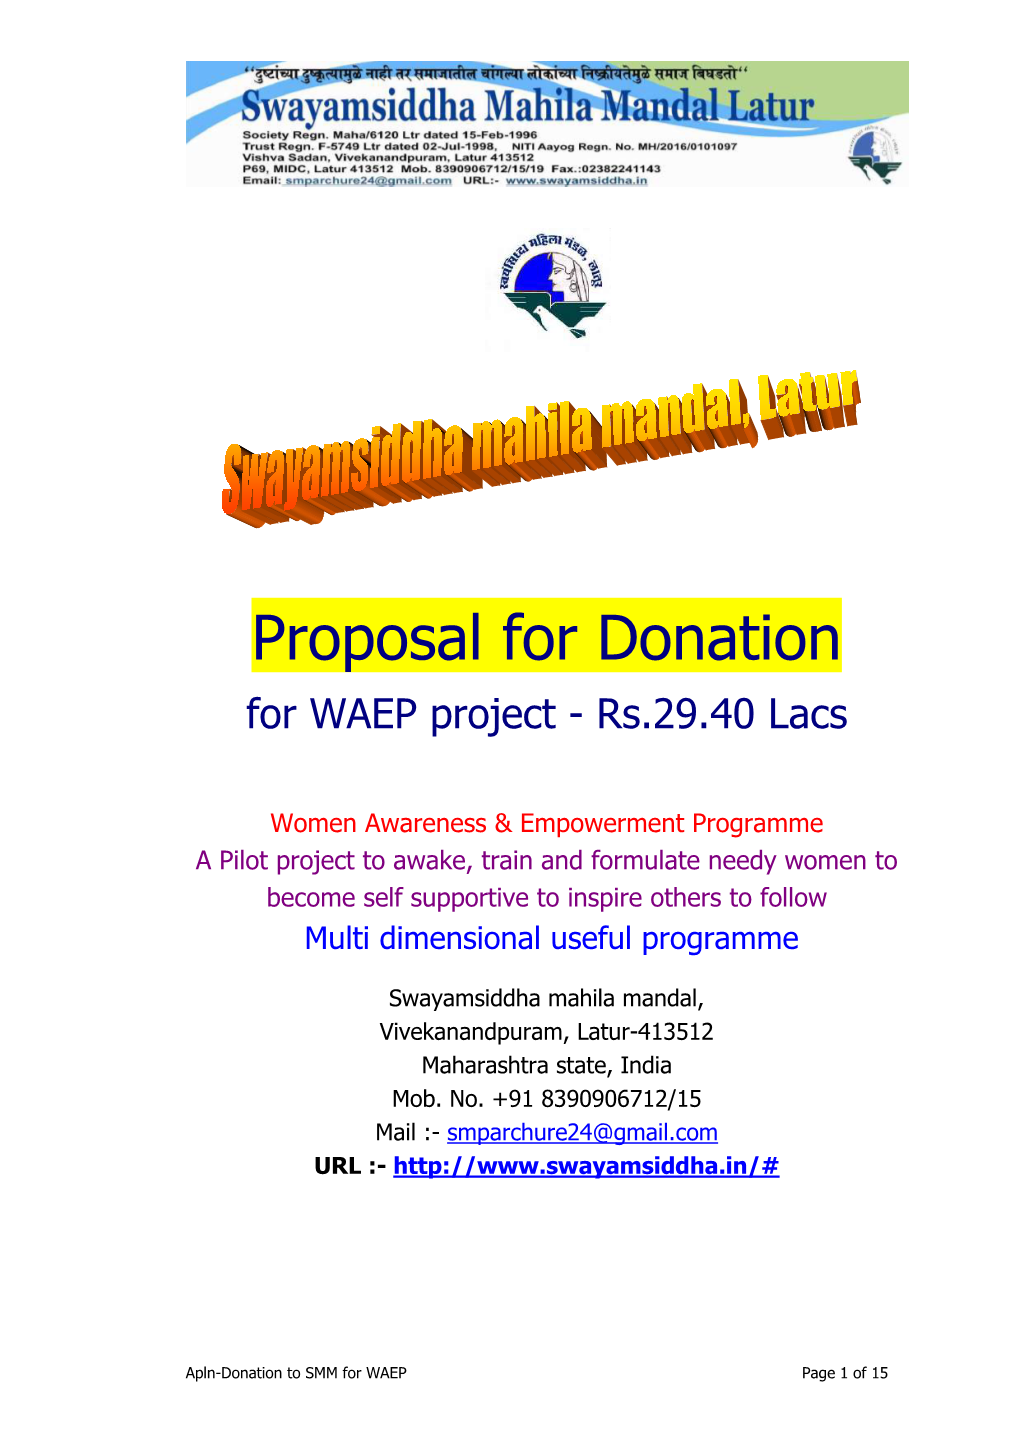 Apln-Donation to SMM for WAEP Page 1 of 15